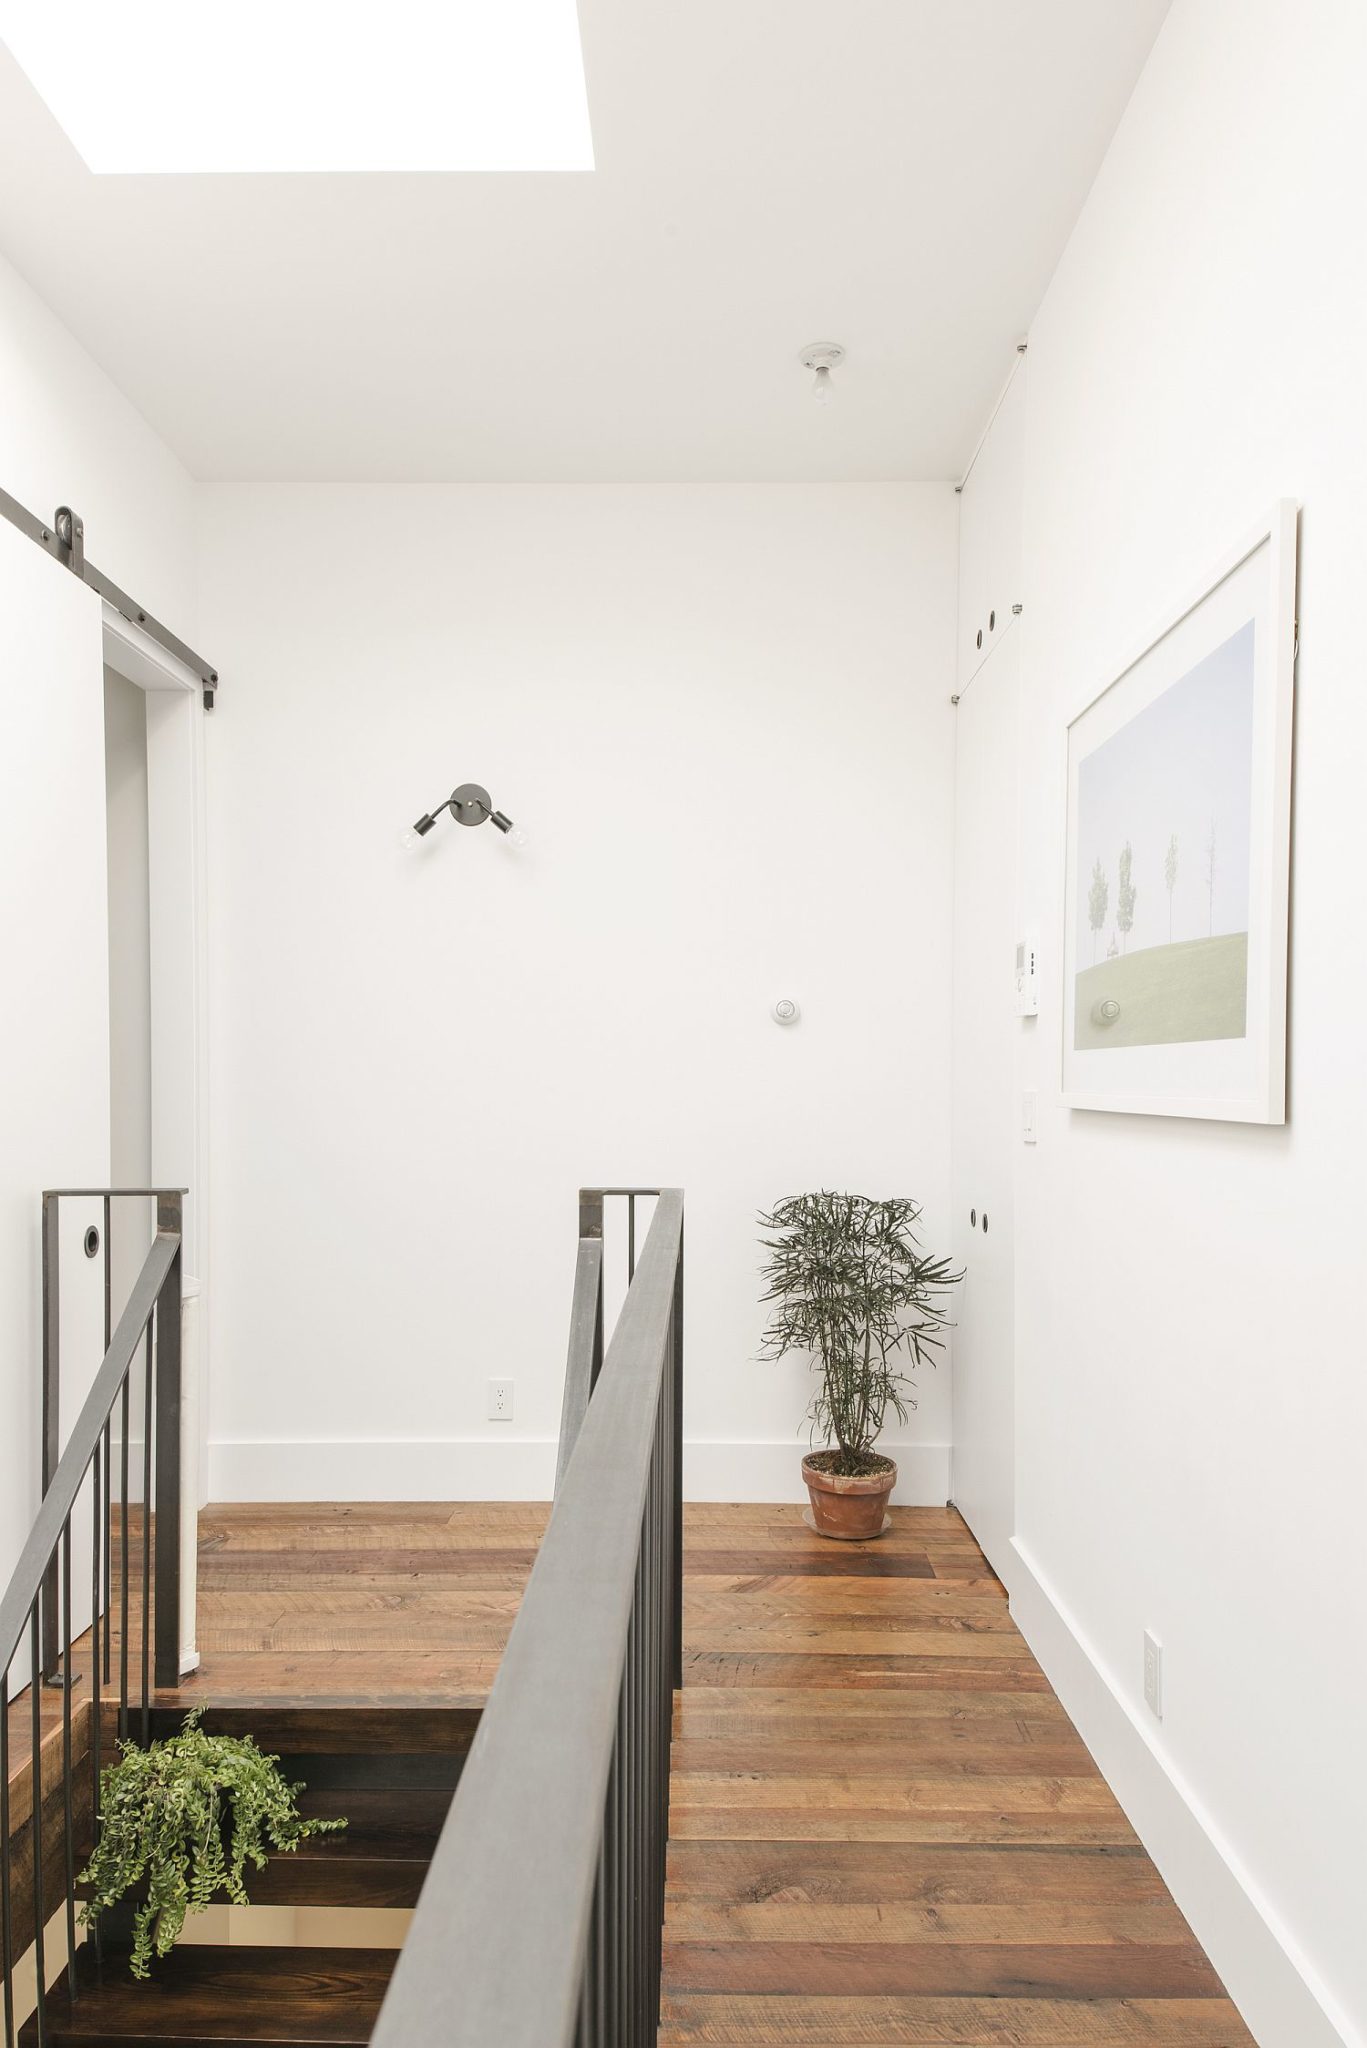 Skylight brings ample natural light into the renovated townhouse